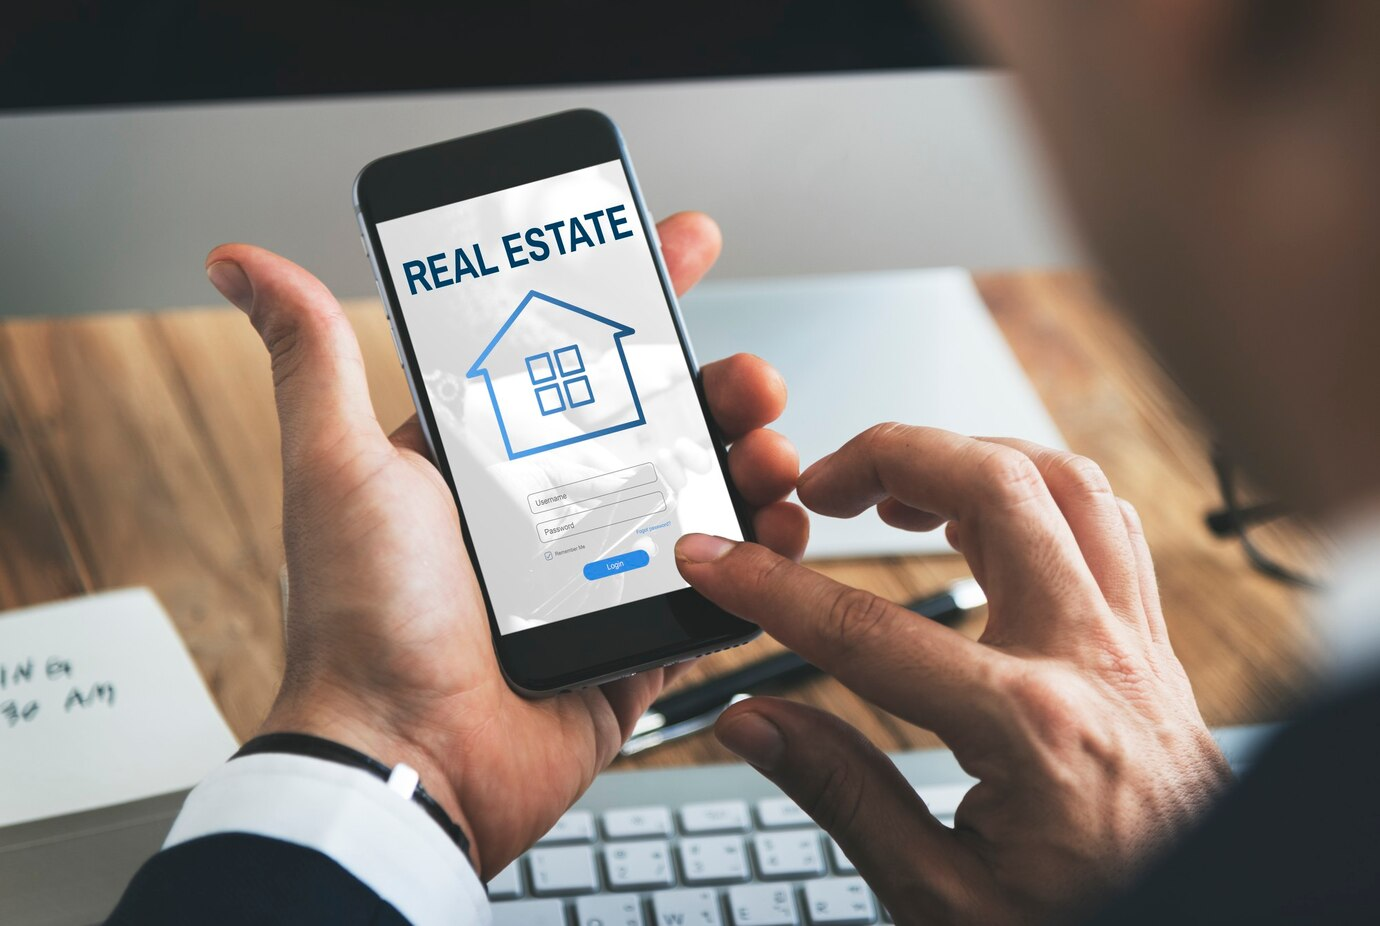 The Rise of Real Estate Social Networks